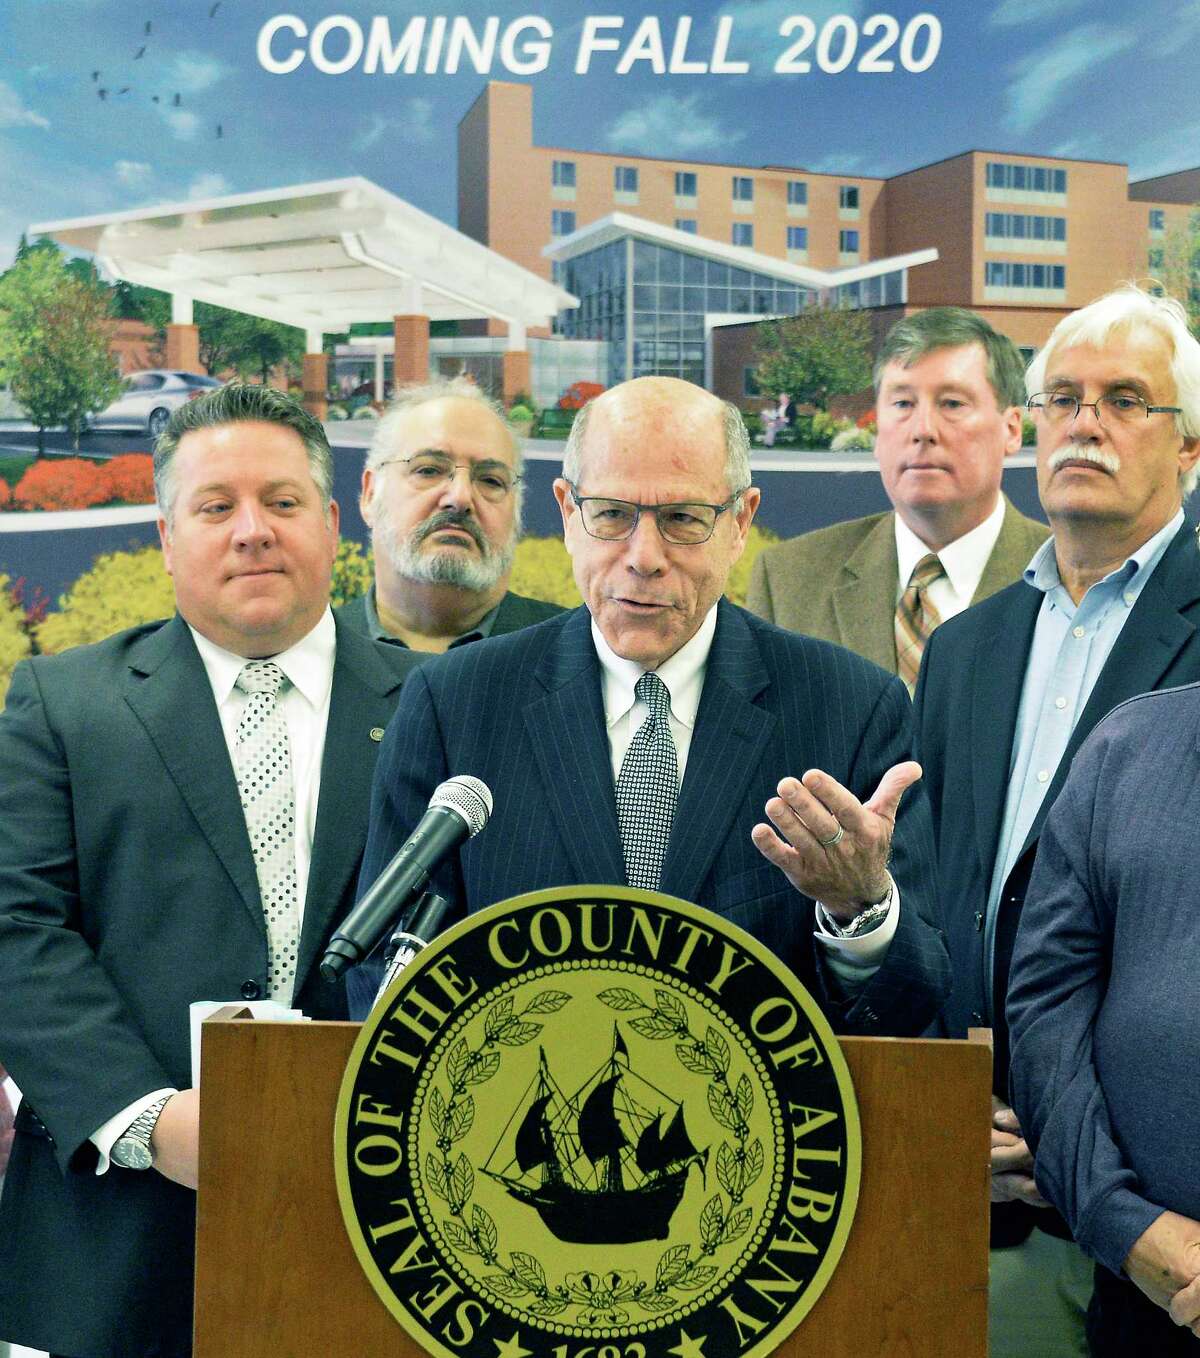 Executive director Larry Slatky, center, speaks during a news conference on the renovations of the Albany County Nursing Home Thursday Oct. 18, 2018 in Colonie, NY. At left is Albany County Executive Dan McCoy. (John Carl D'Annibale/Times Union)